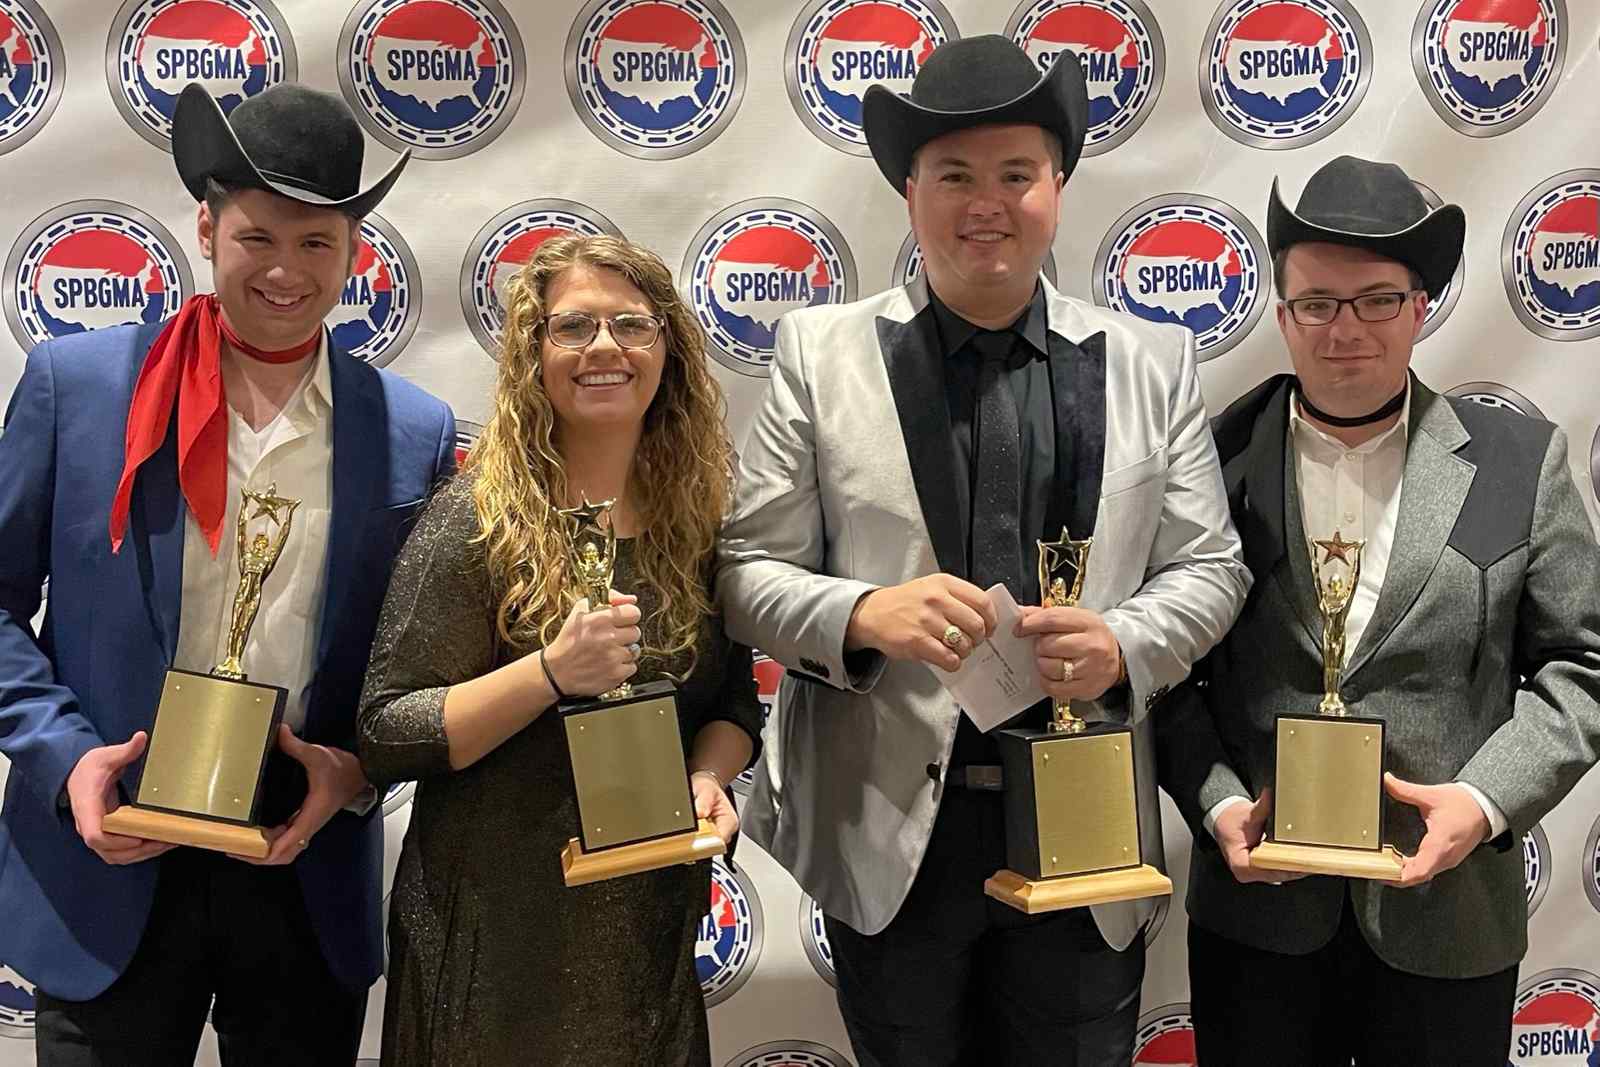 The Kody Norris Show Wins Entertainer of the Year and Instrumental Group of the Year At 2023 SPBGMA Awards